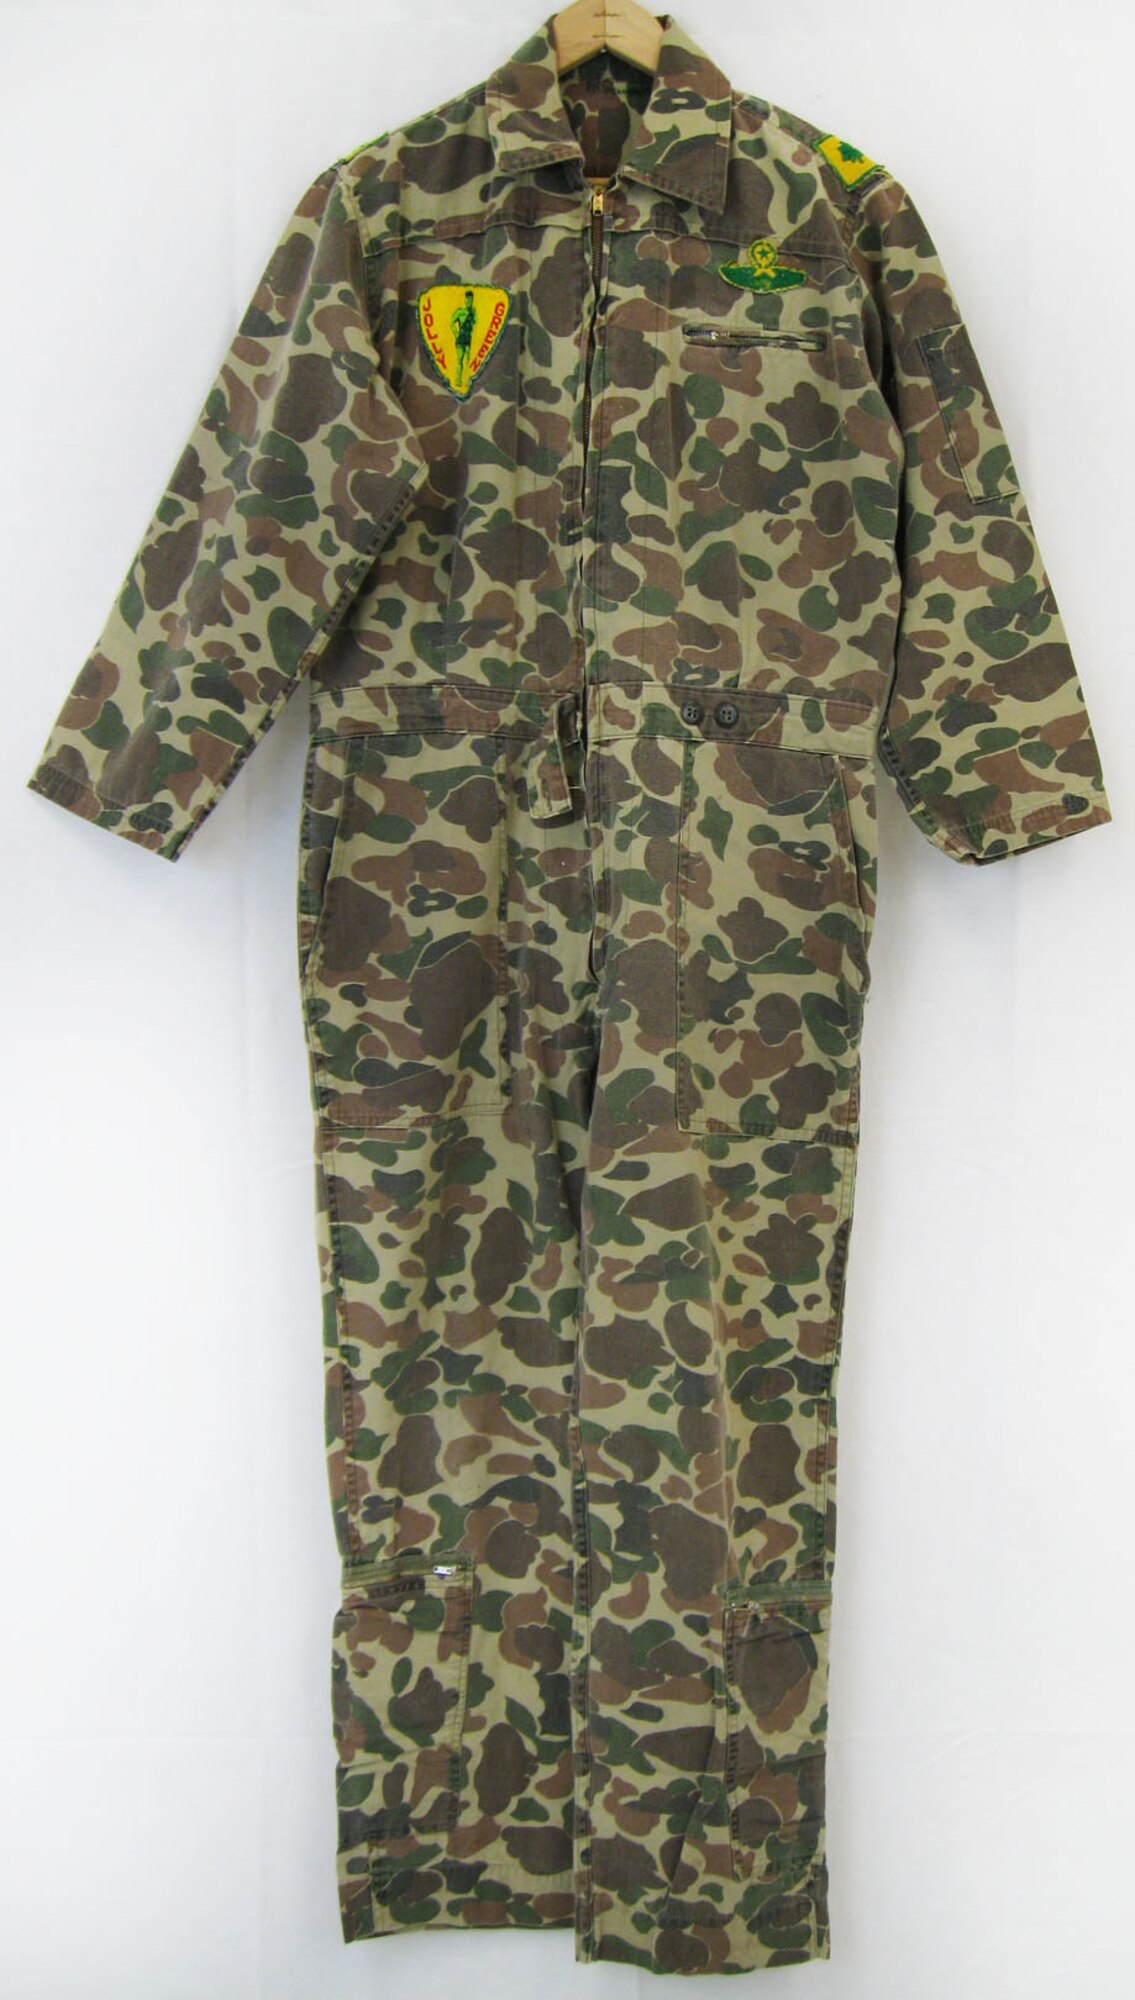 These unofficial coveralls belonged to the donor’s uncle, Maj. Dean H. Williams Jr., who served in the USAF from 1942-1972. Maj. Williams served in the South Pacific during World War II, and he was stationed at Udorn Royal Thai Air Force Base and Nakhon Phanom Royal Thai Air Force Base during the war in Southeast Asia. He also flew special operations and Jolly Green helicopter rescue missions in Southeast Asia as well as participating with missions to Lima Site 85. (U.S. Air Force photo)